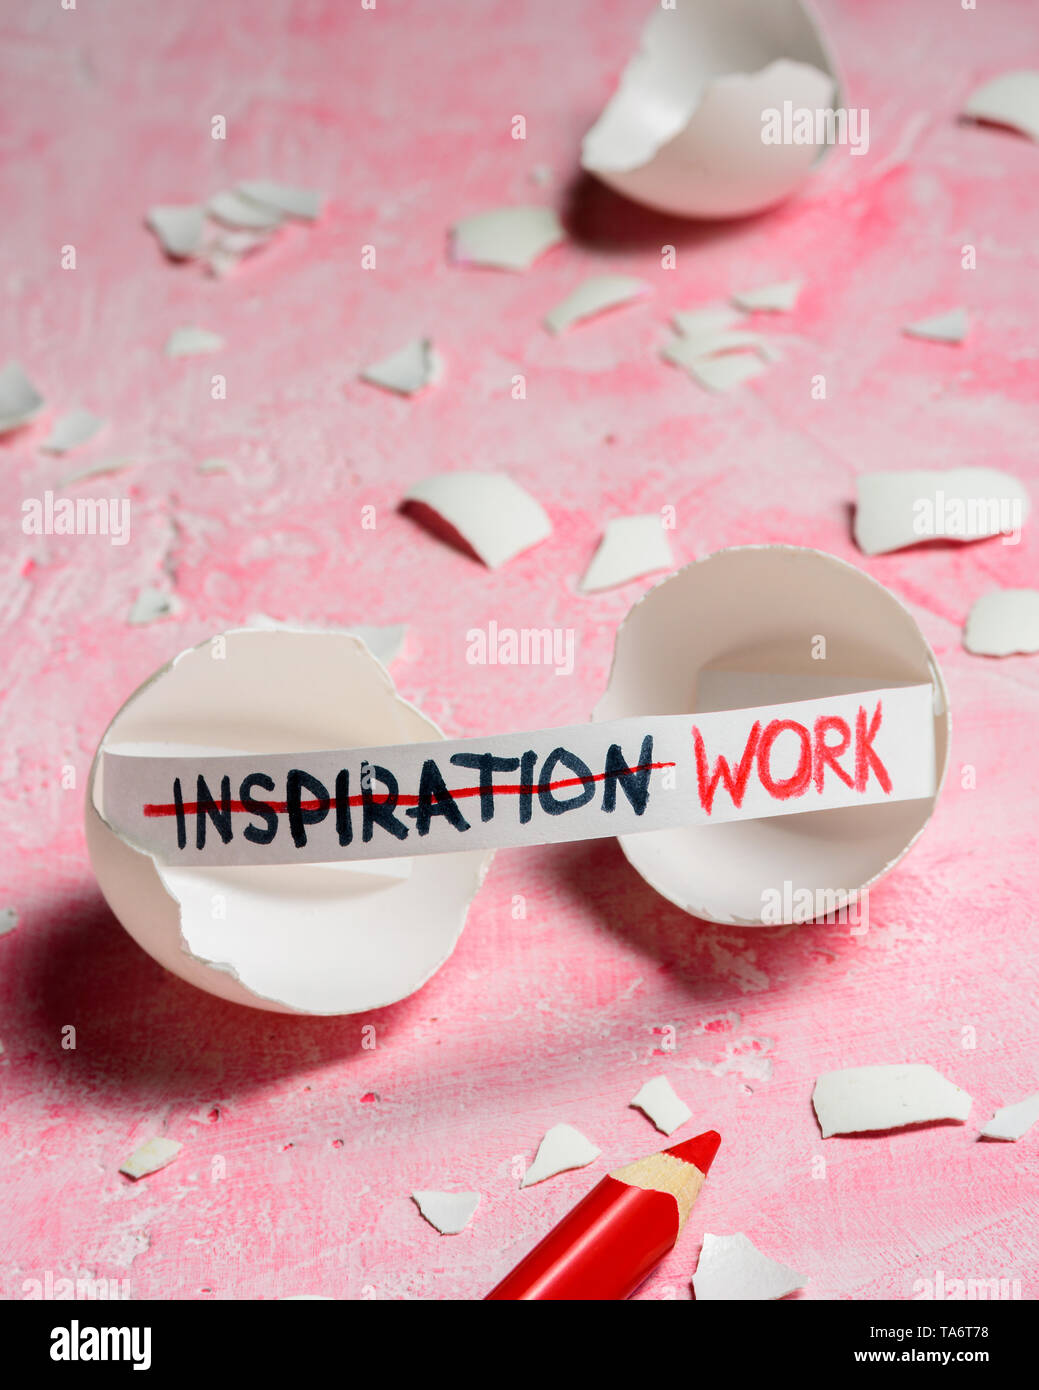 Work hard and inspiration concept. Cracked egg on pink background with text INSPIRATION and WORK. Like fortune cookies Stock Photo